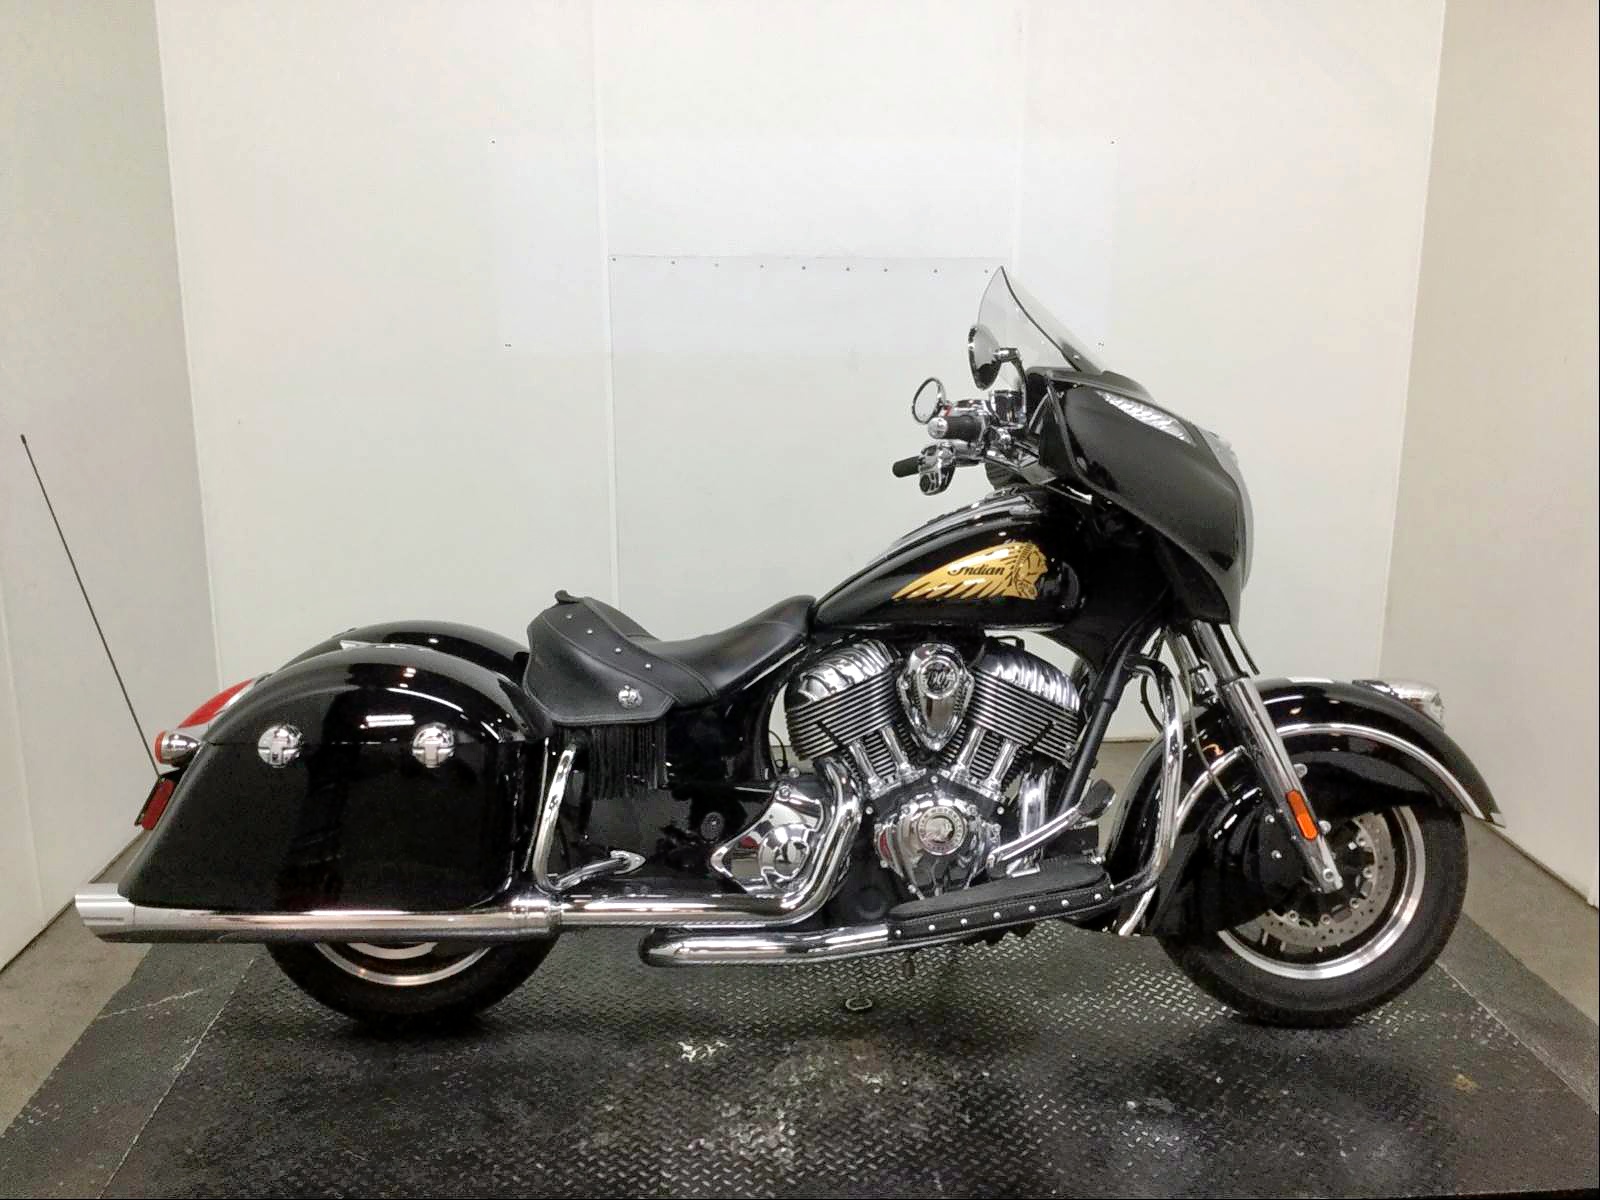 2014 Indian Motorcycle Co. Chieftain for sale at Copart Ellenwood, GA Lot# 32153200